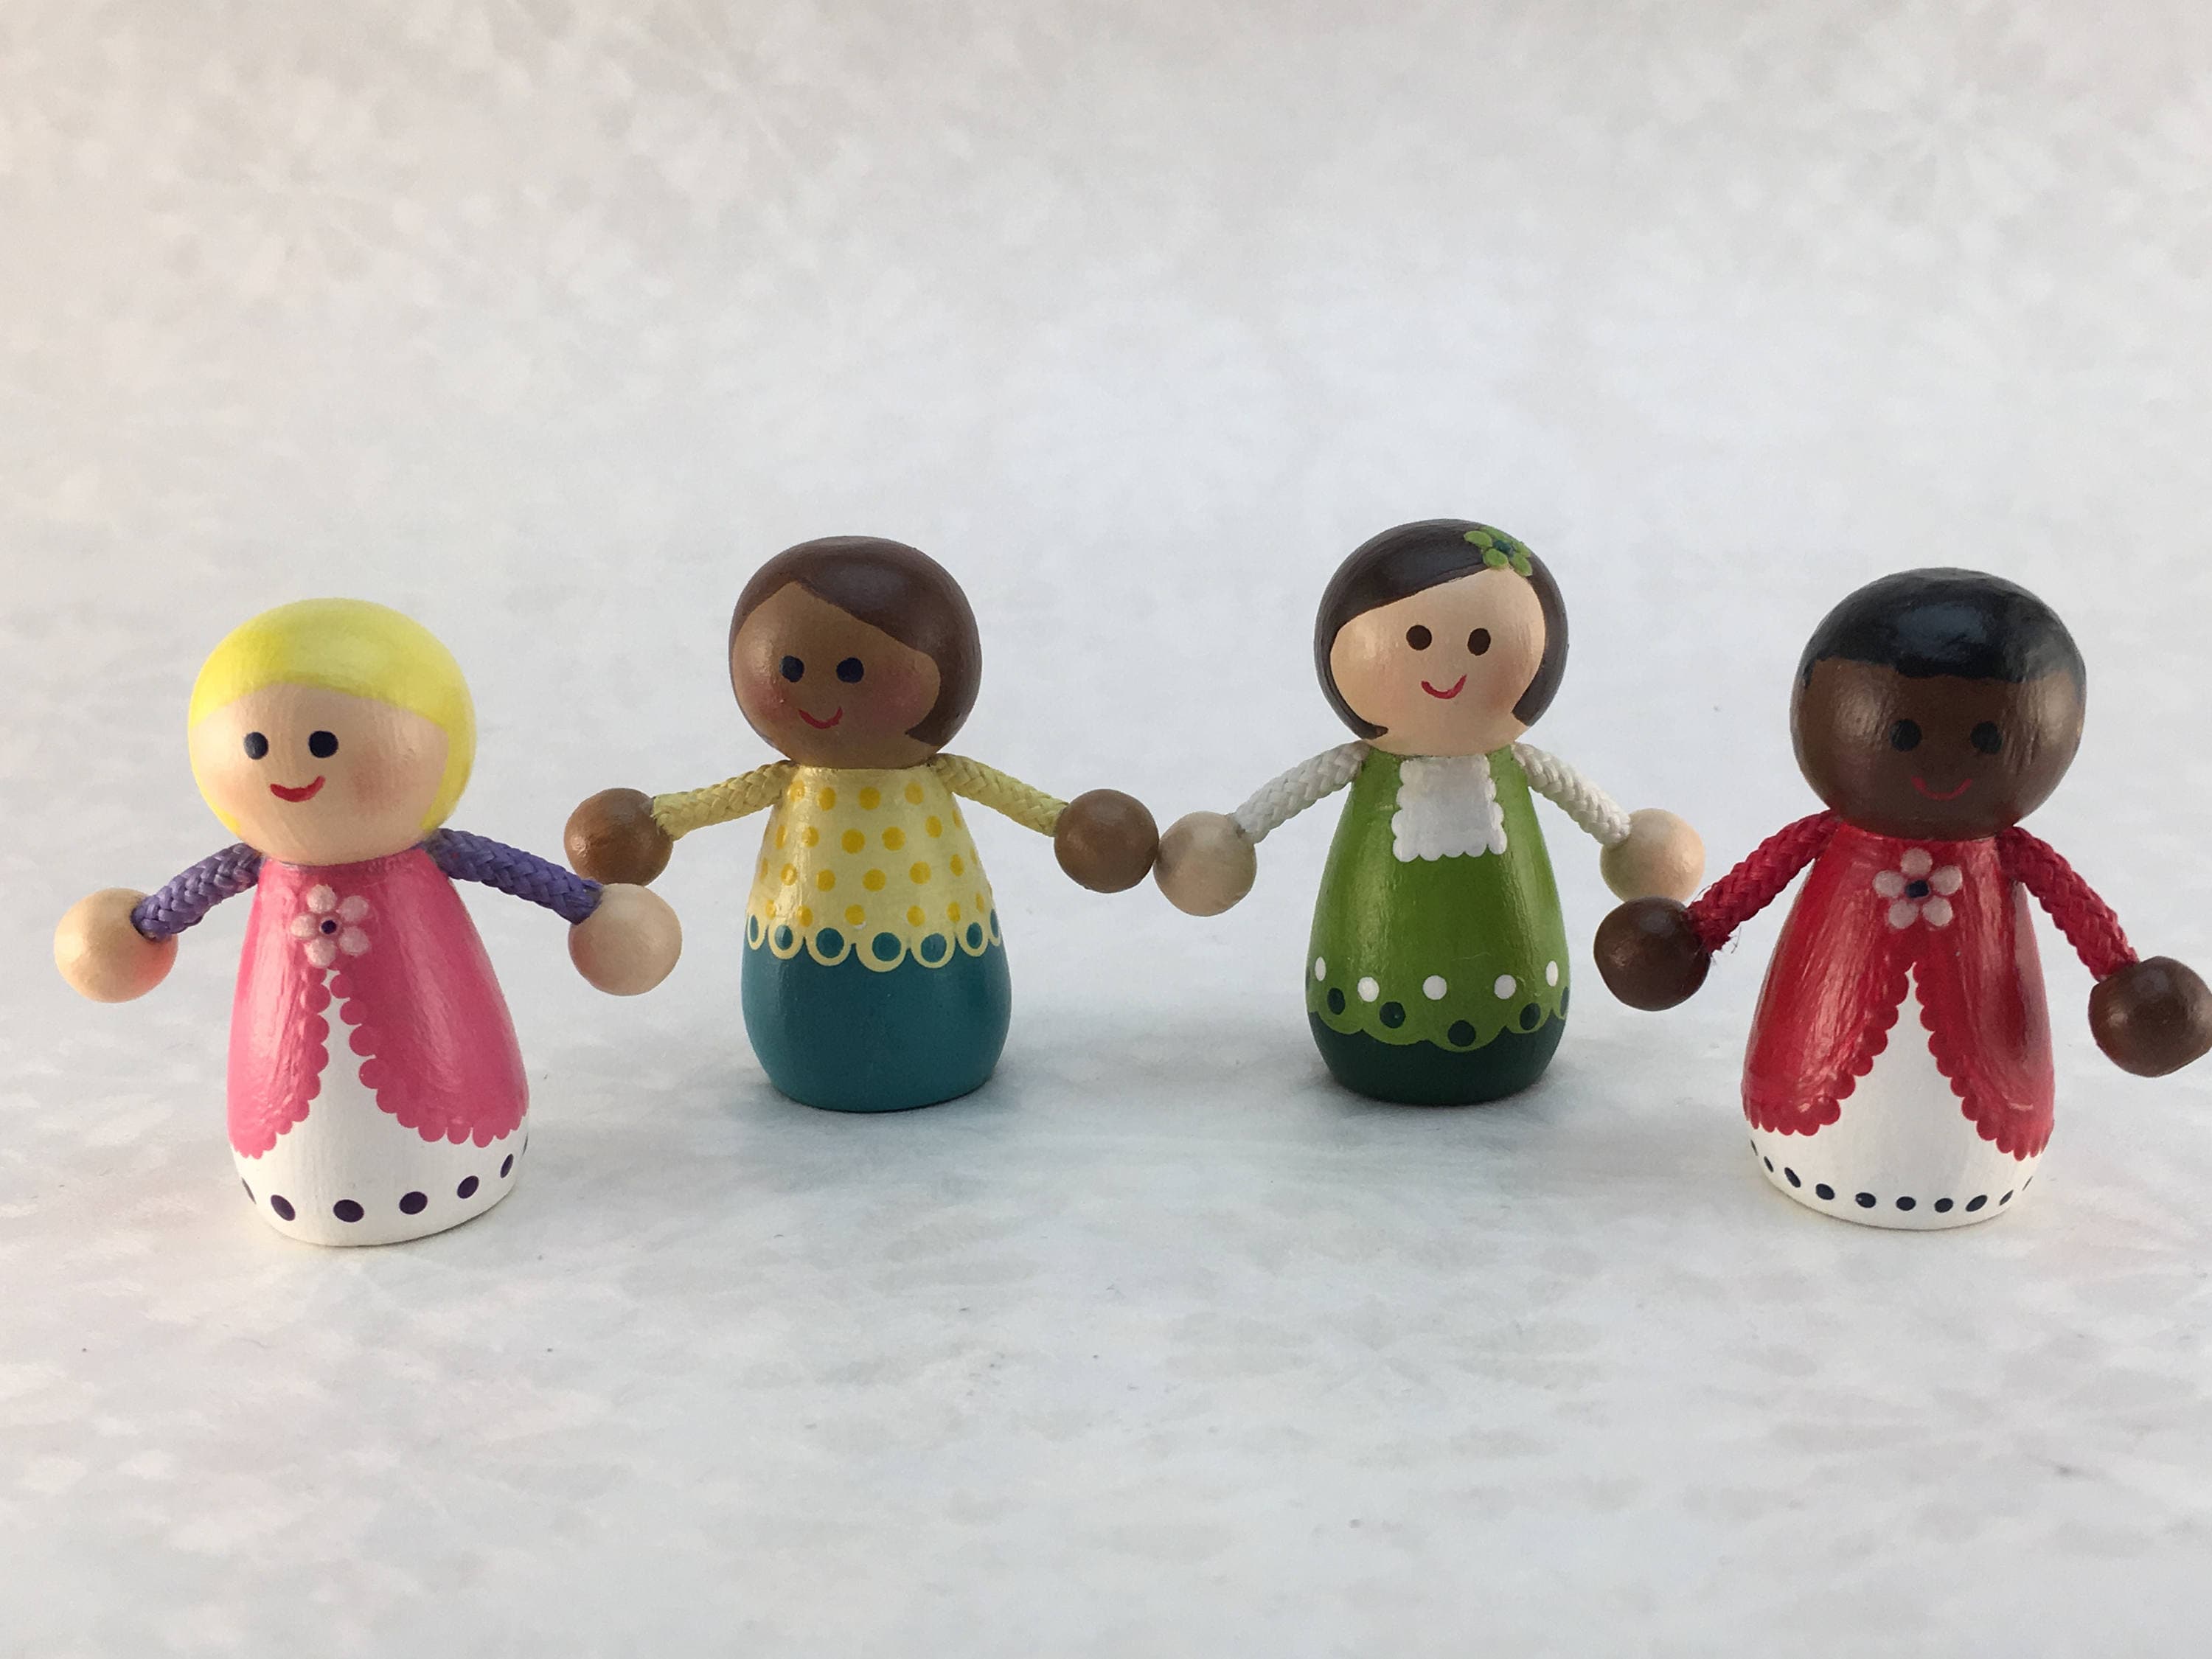 30 Wooden Peg Dolls Unfinished Wooden People Girl W/skirt 